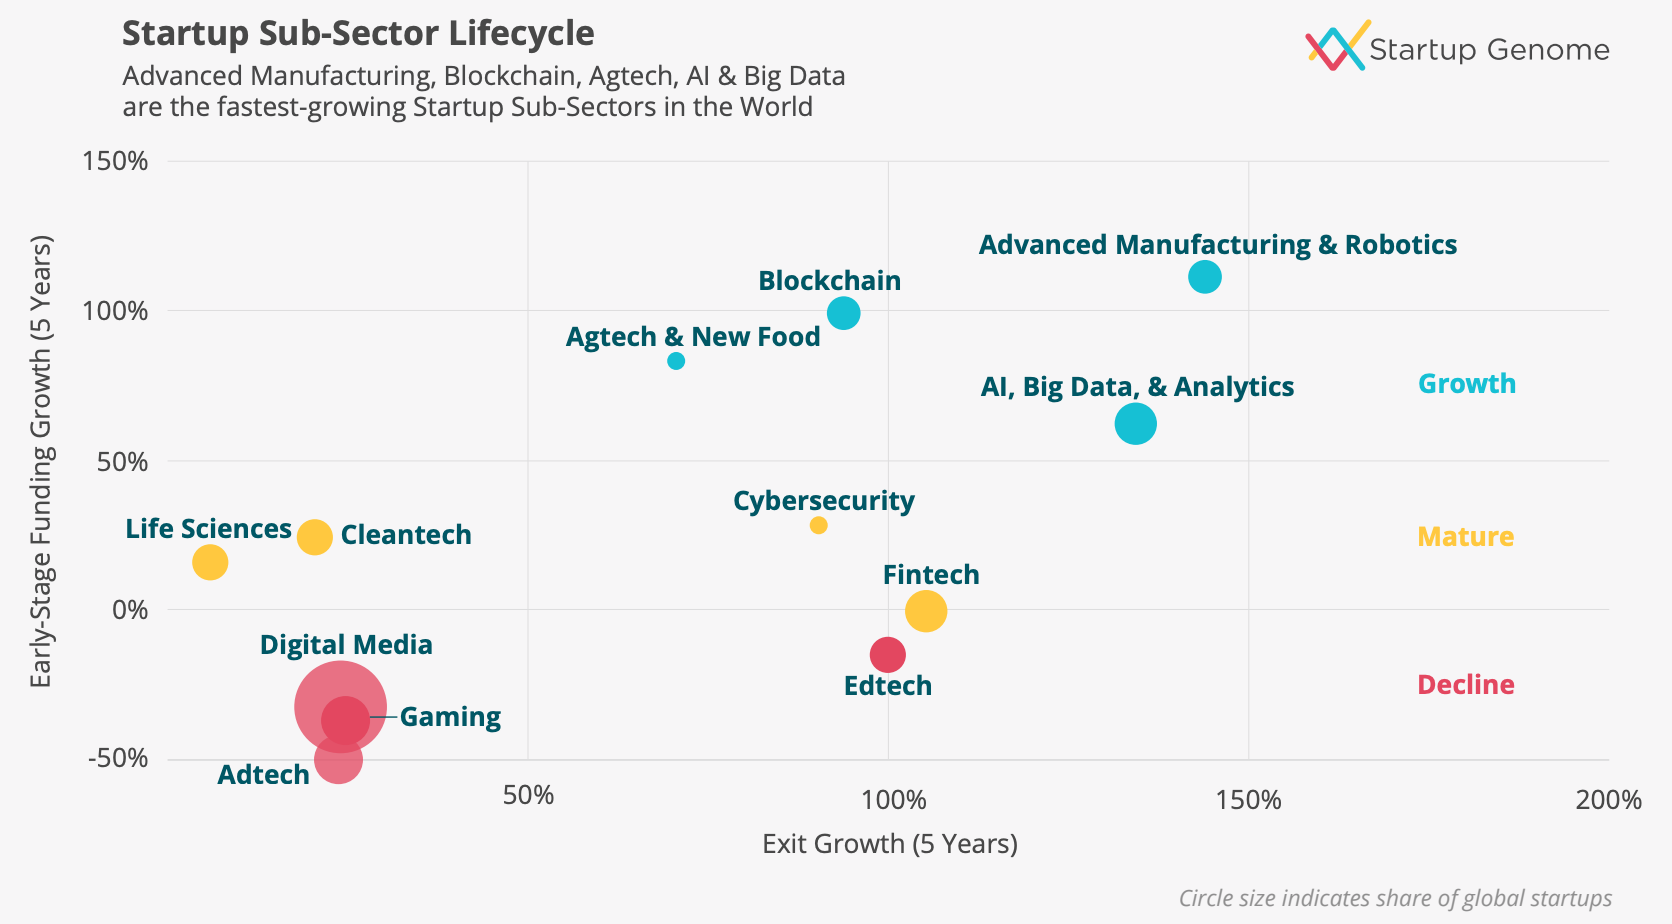 Startup Genome: Adtech, edtech, digital media and gaming are in decline